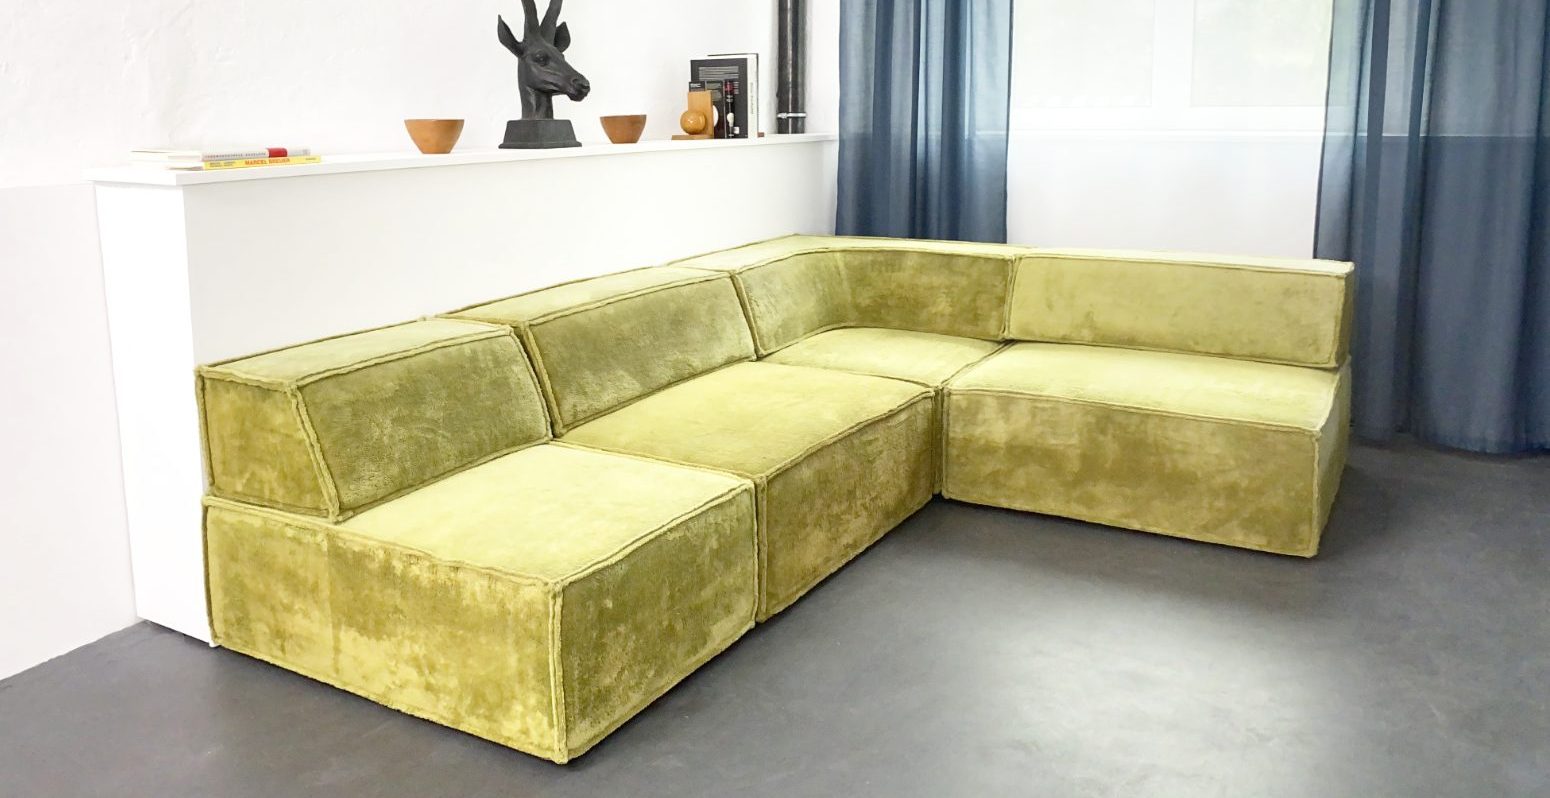 “SOLD” Modular COR Trio Sofa by Team Form AG, Switzerland, for COR, Germany, 70s.